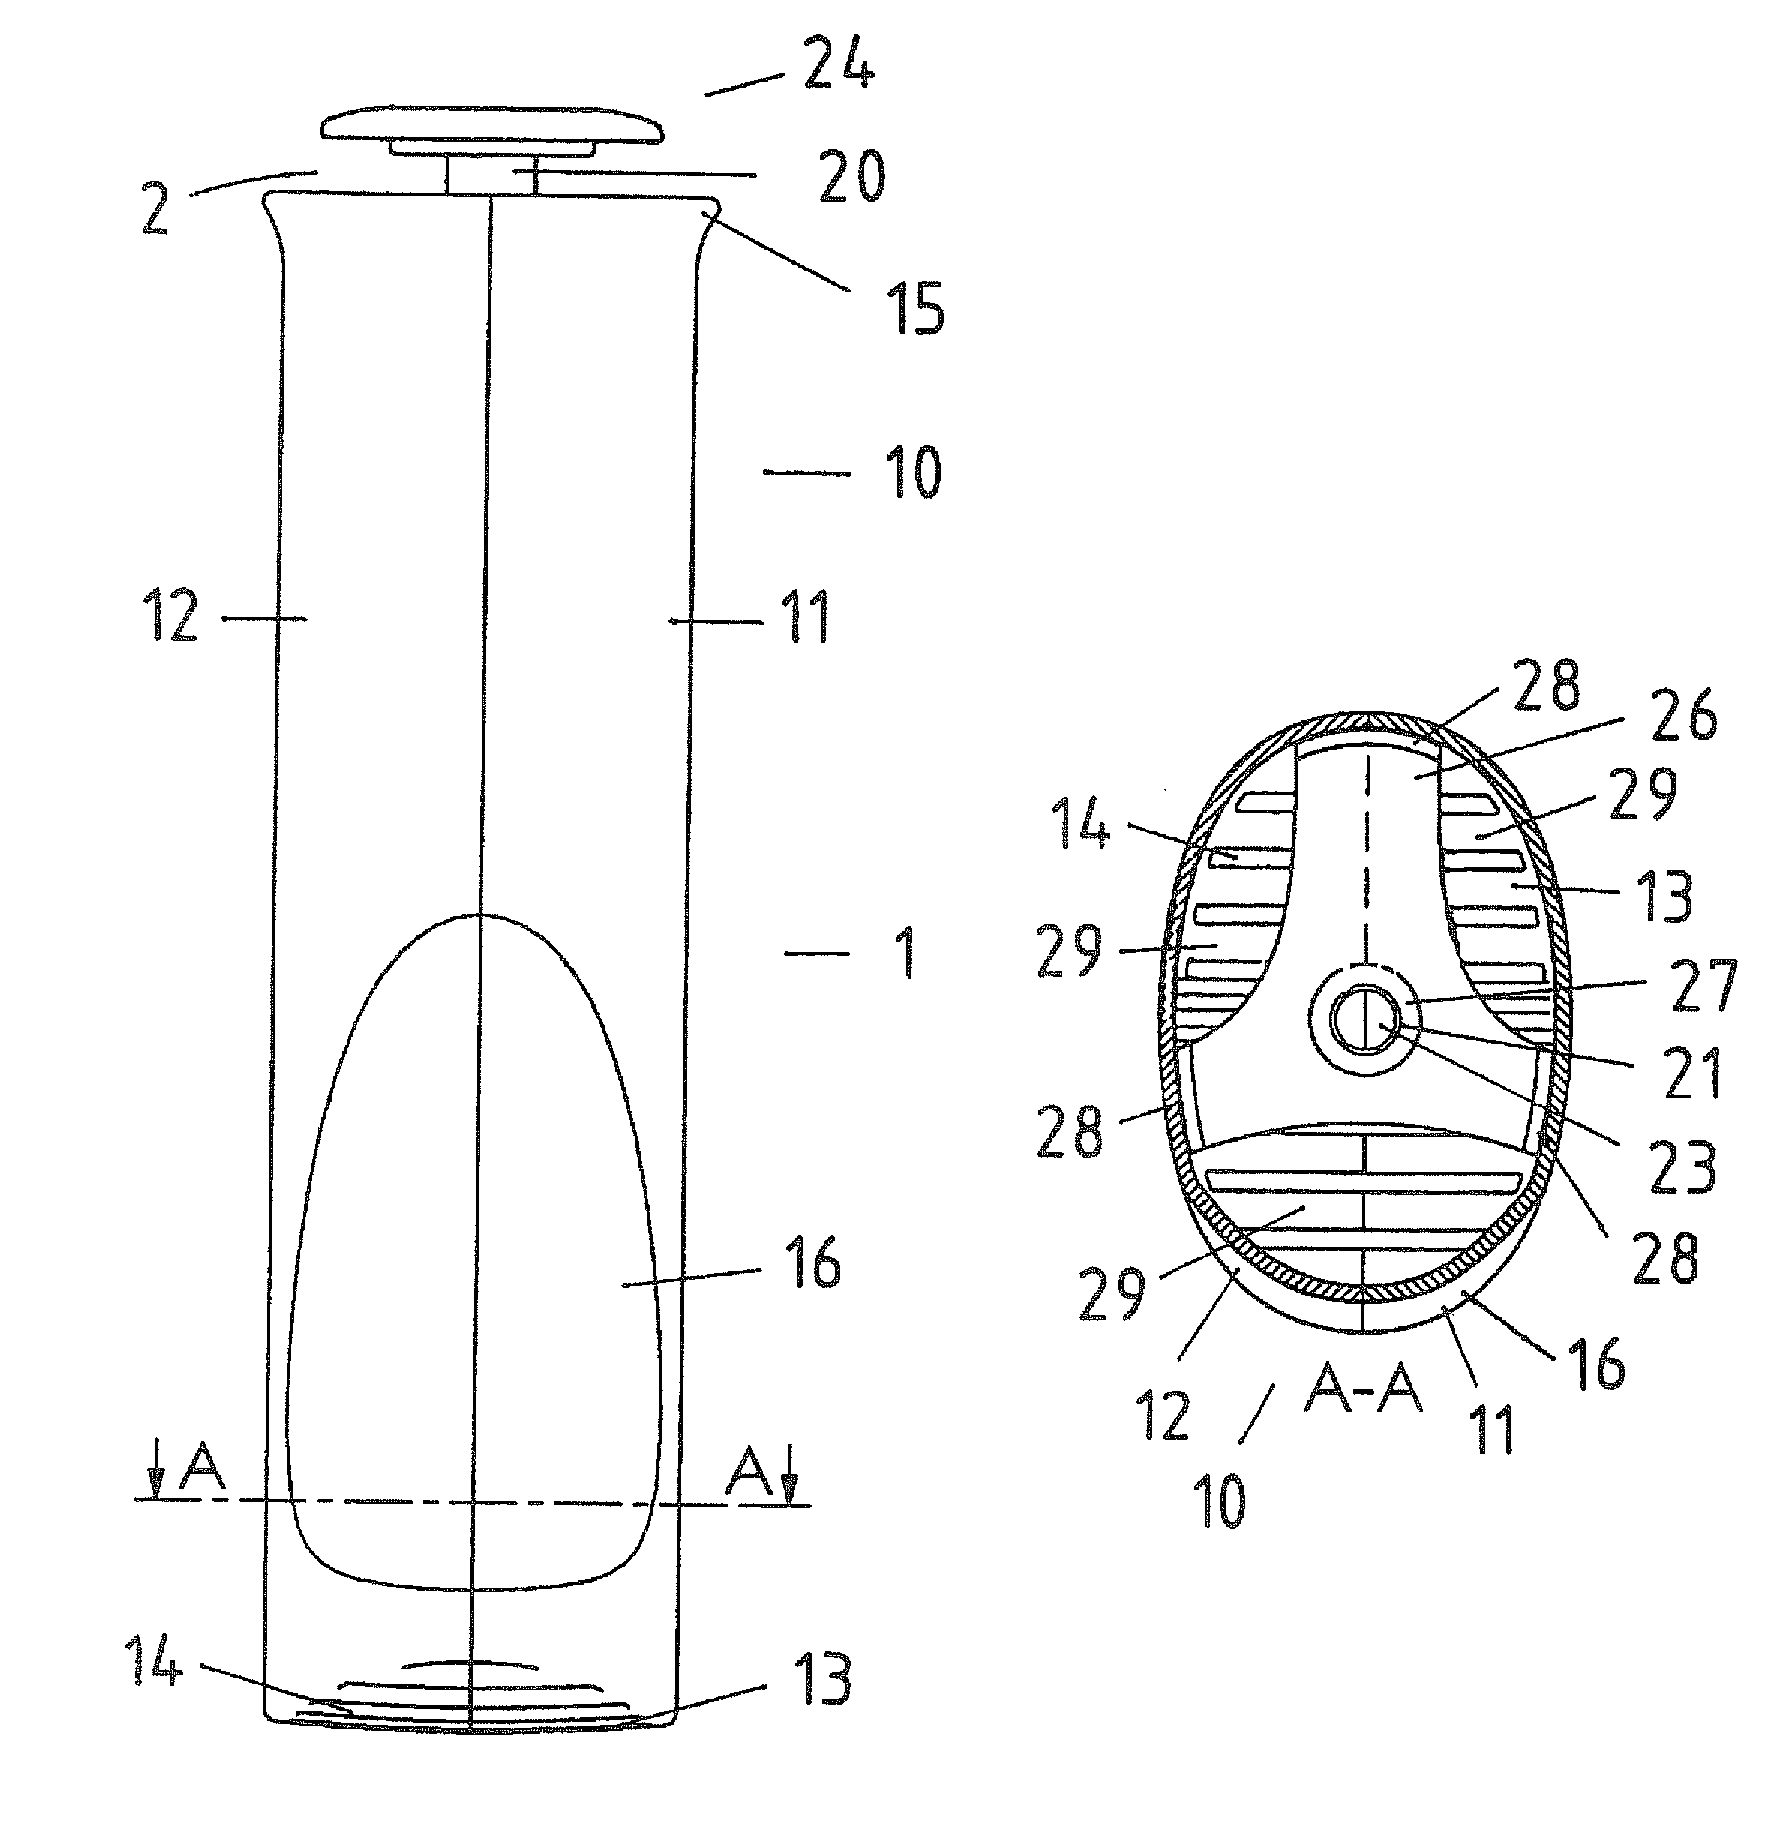 Pocket umbrella comprising a handle cover and a support for the telescopic tube